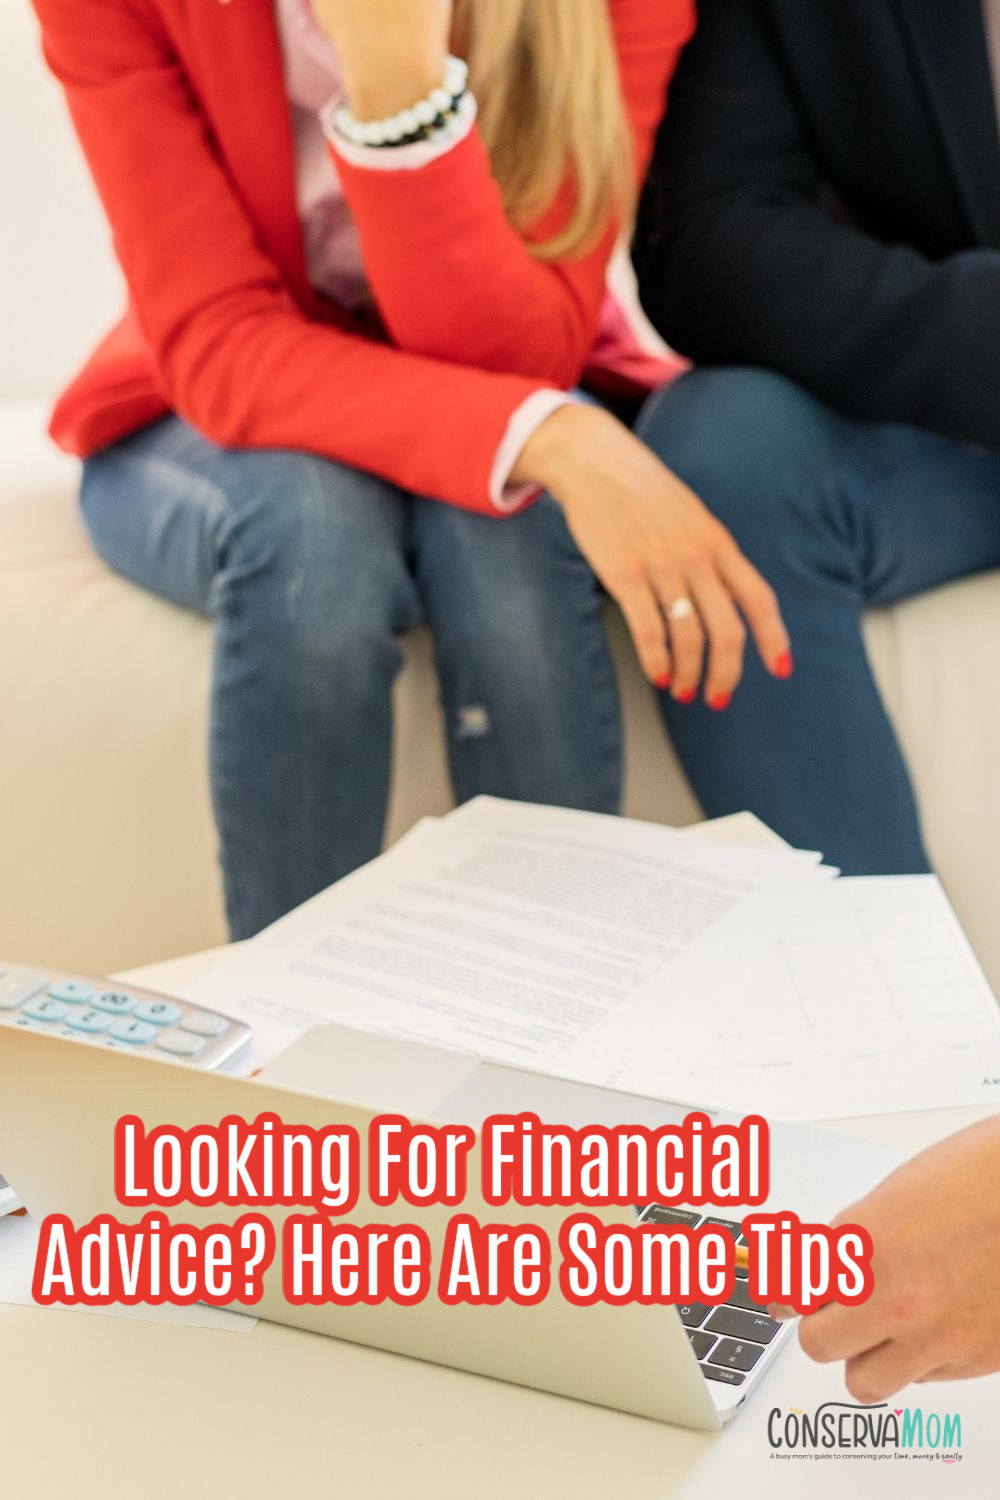 Looking For Financial Advice? Here Are Some Tips